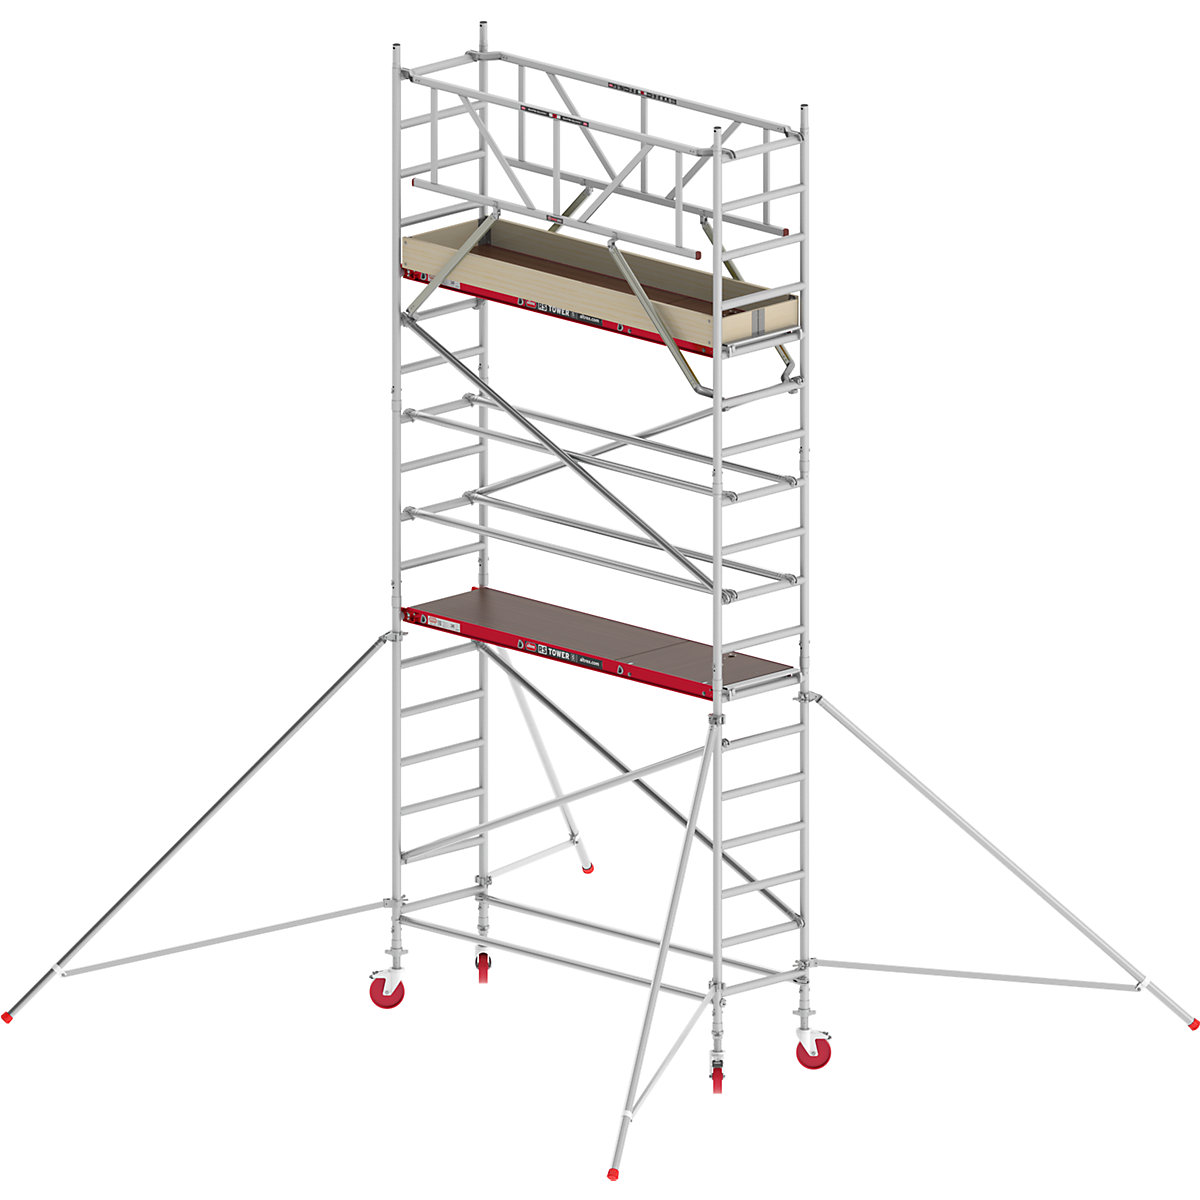 RS TOWER 41 slim mobile access tower – Altrex, wooden platform, length 1.85 m, working height 6.20 m-7